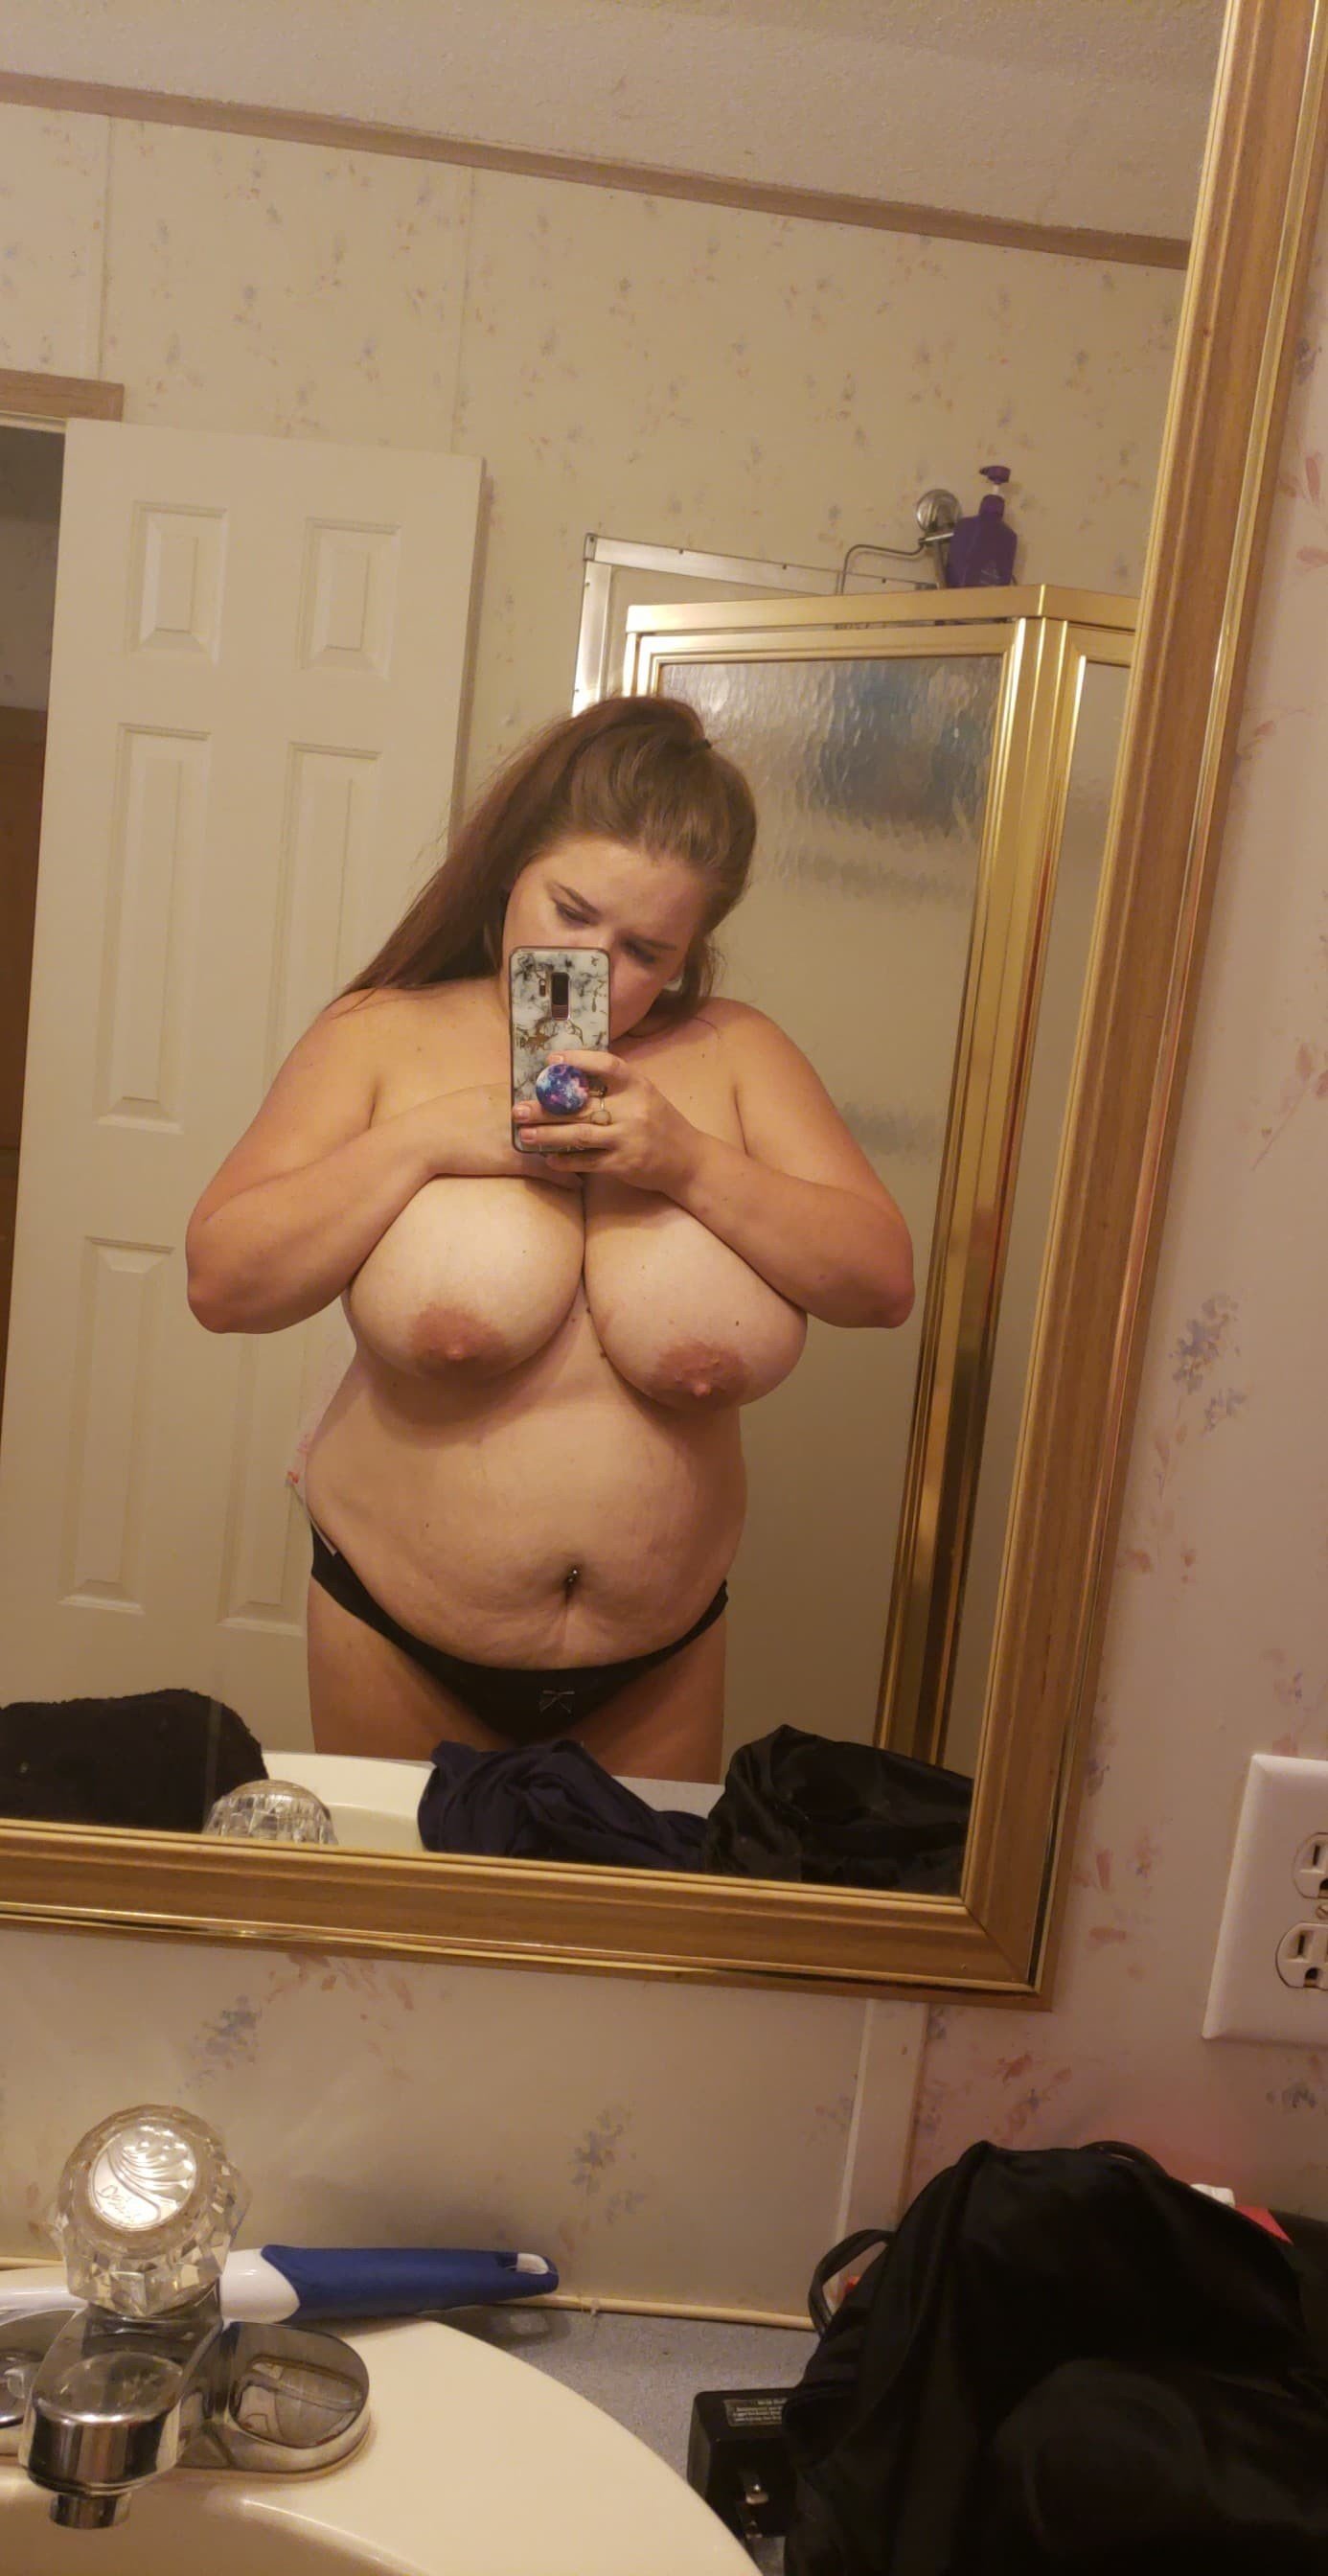 Photo by Women Of All Sizes with the username @WomenOfAllSizes,  May 21, 2020 at 8:12 PM. The post is about the topic BBW and the text says 'Started a couple new Topics.
*Milf Paradise https://sharesome.com/topic/milfparadise/
*Pick One https://sharesome.com/topic/pickone/
*Nipple Paradise https://sharesome.com/topic/nippleparadise/
Hit Them With A Follow
#tits #boobs #hot #sexy #nude #naked..'